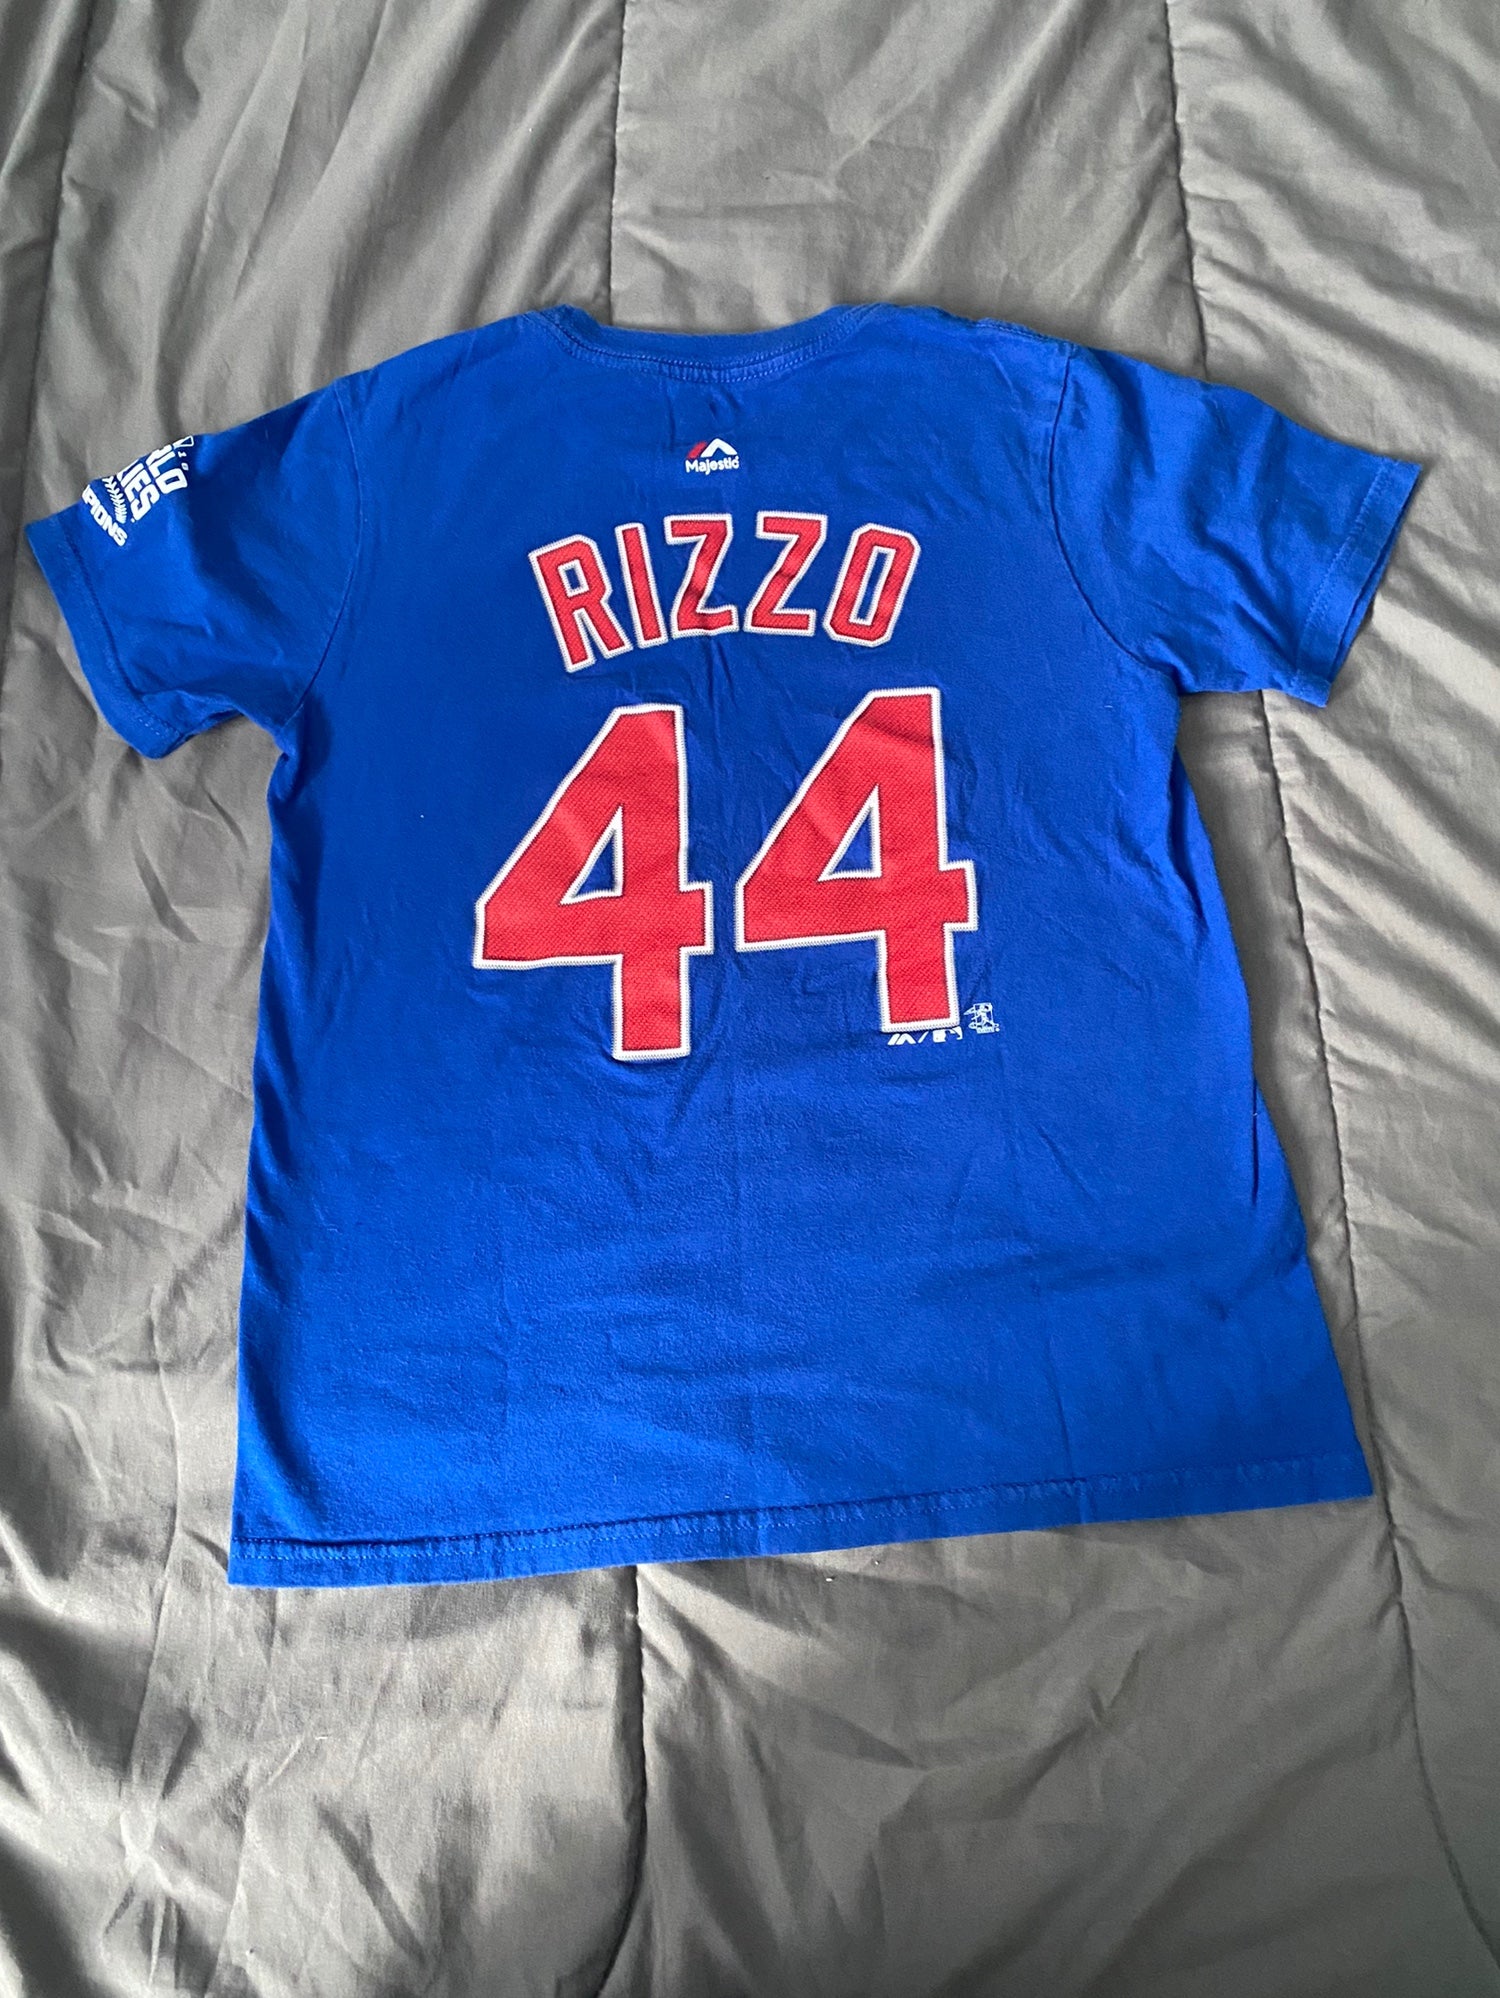 chicago cubs rizzo jersey